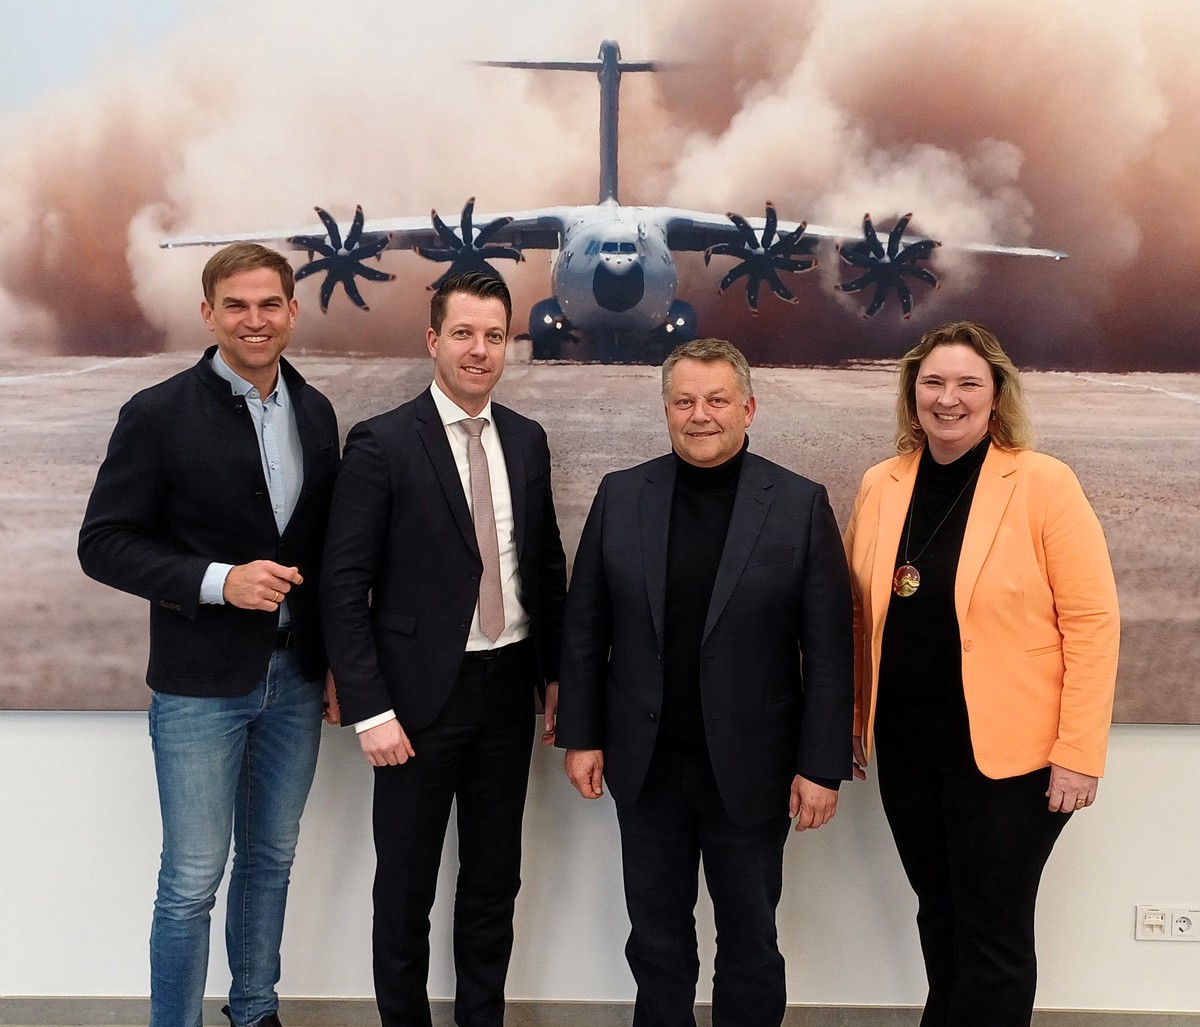 v.l.n.r.: Maximilian Bltl, MdL; Tobias Hpfl, Key Account und Public Affairs Federal States; Volker Paltzo, Head of Site Ottobrunn & Head of Airbus Defence and Space Sites Development; Staatsministerin a.D. Kerstin Schreyer, MdL